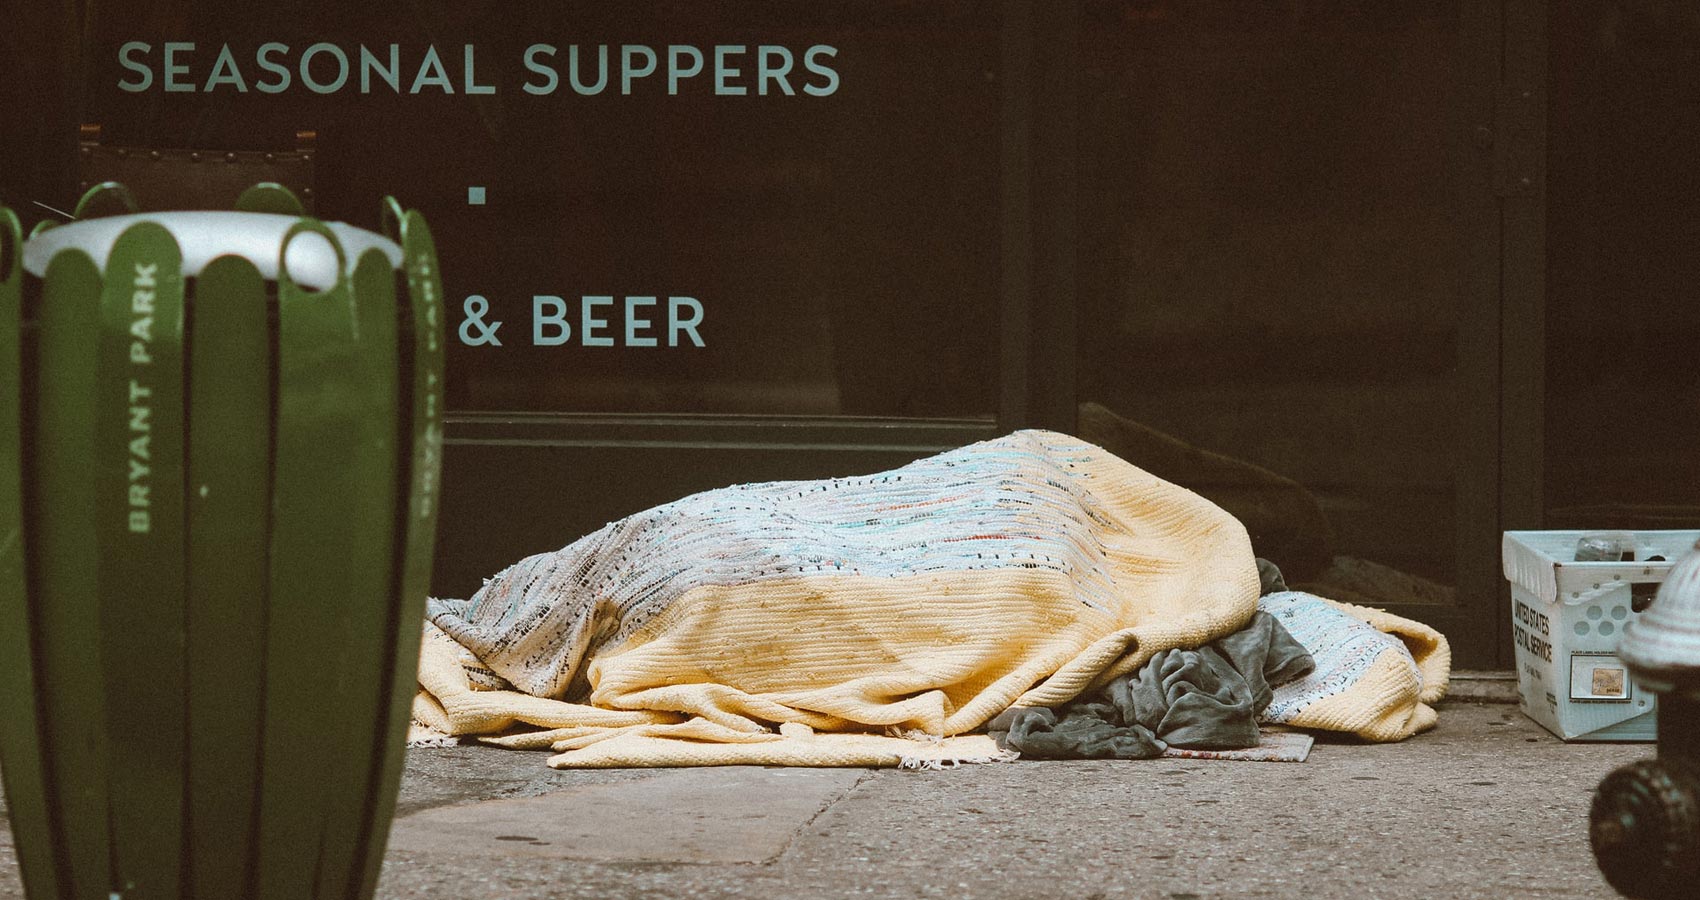 Strangers Sleeping on The Streets, poem by Jake Cosmos Aller at Spillwords.com